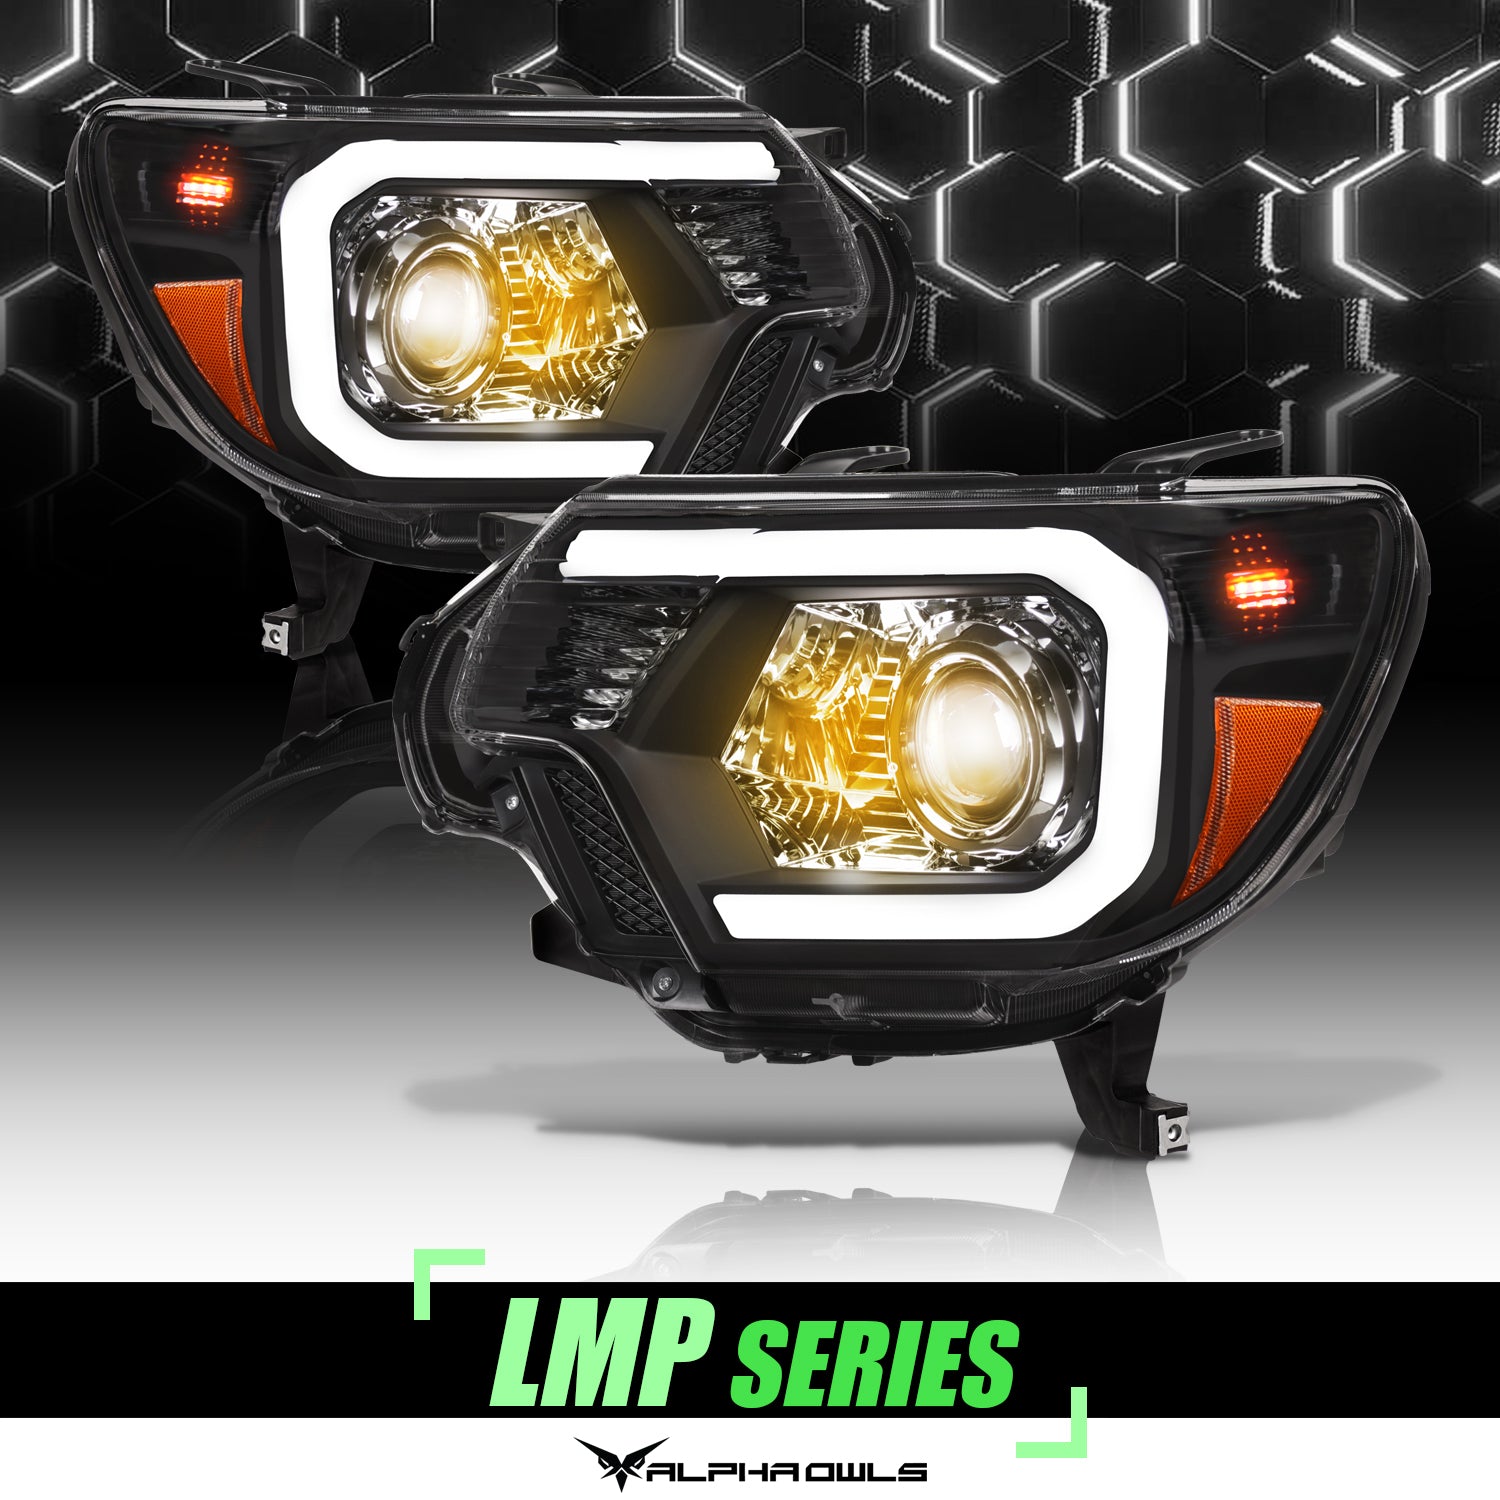 ZMAUTOPARTS Mono-Eye LED DRL Chrome Projector Headlight Lamp with